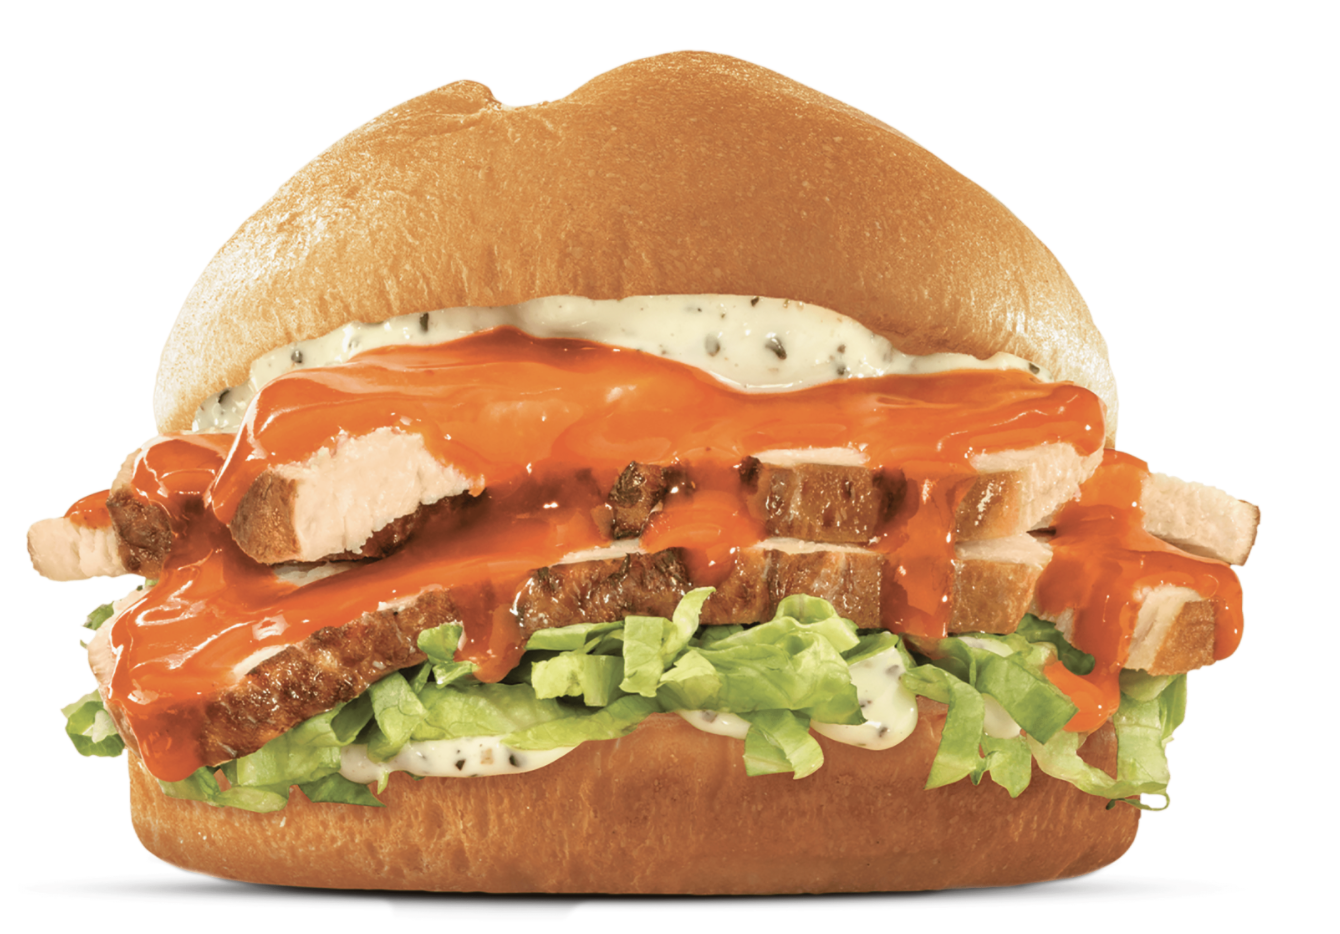 How many calories are in an Arby's Buffalo Chicken Slider?